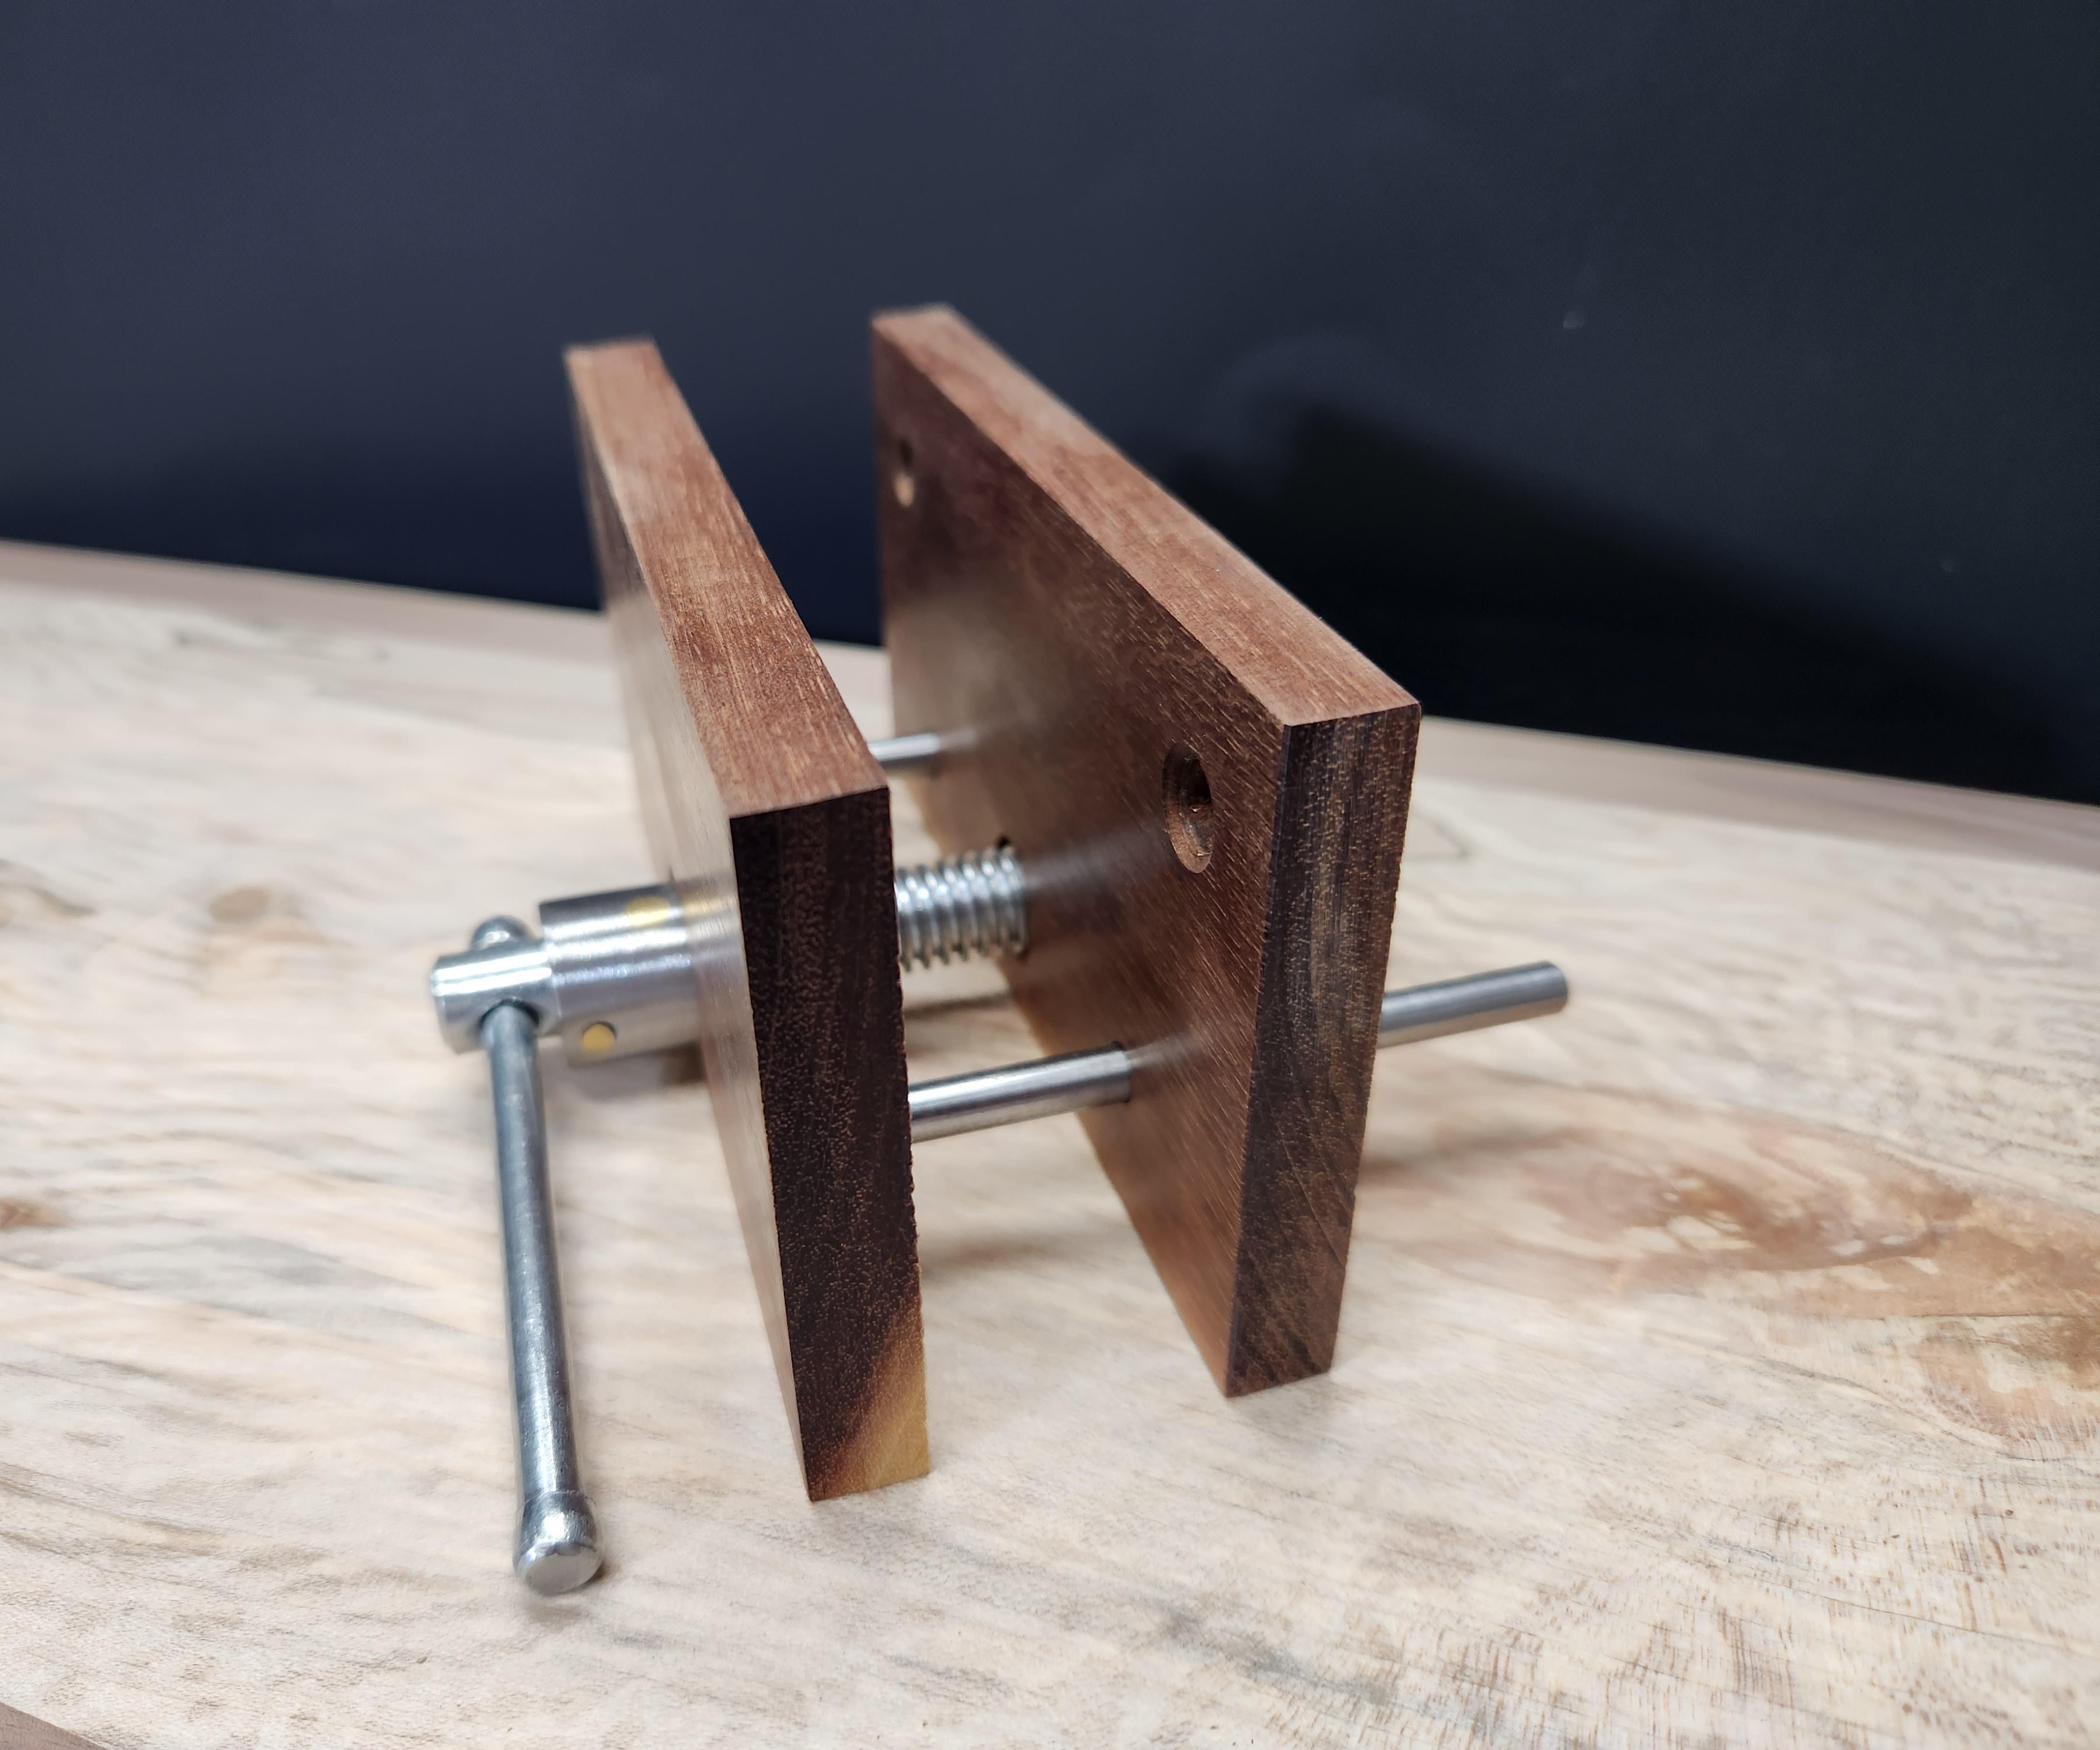 Small Woodworking Vice for My Mini Tabletop Workbench